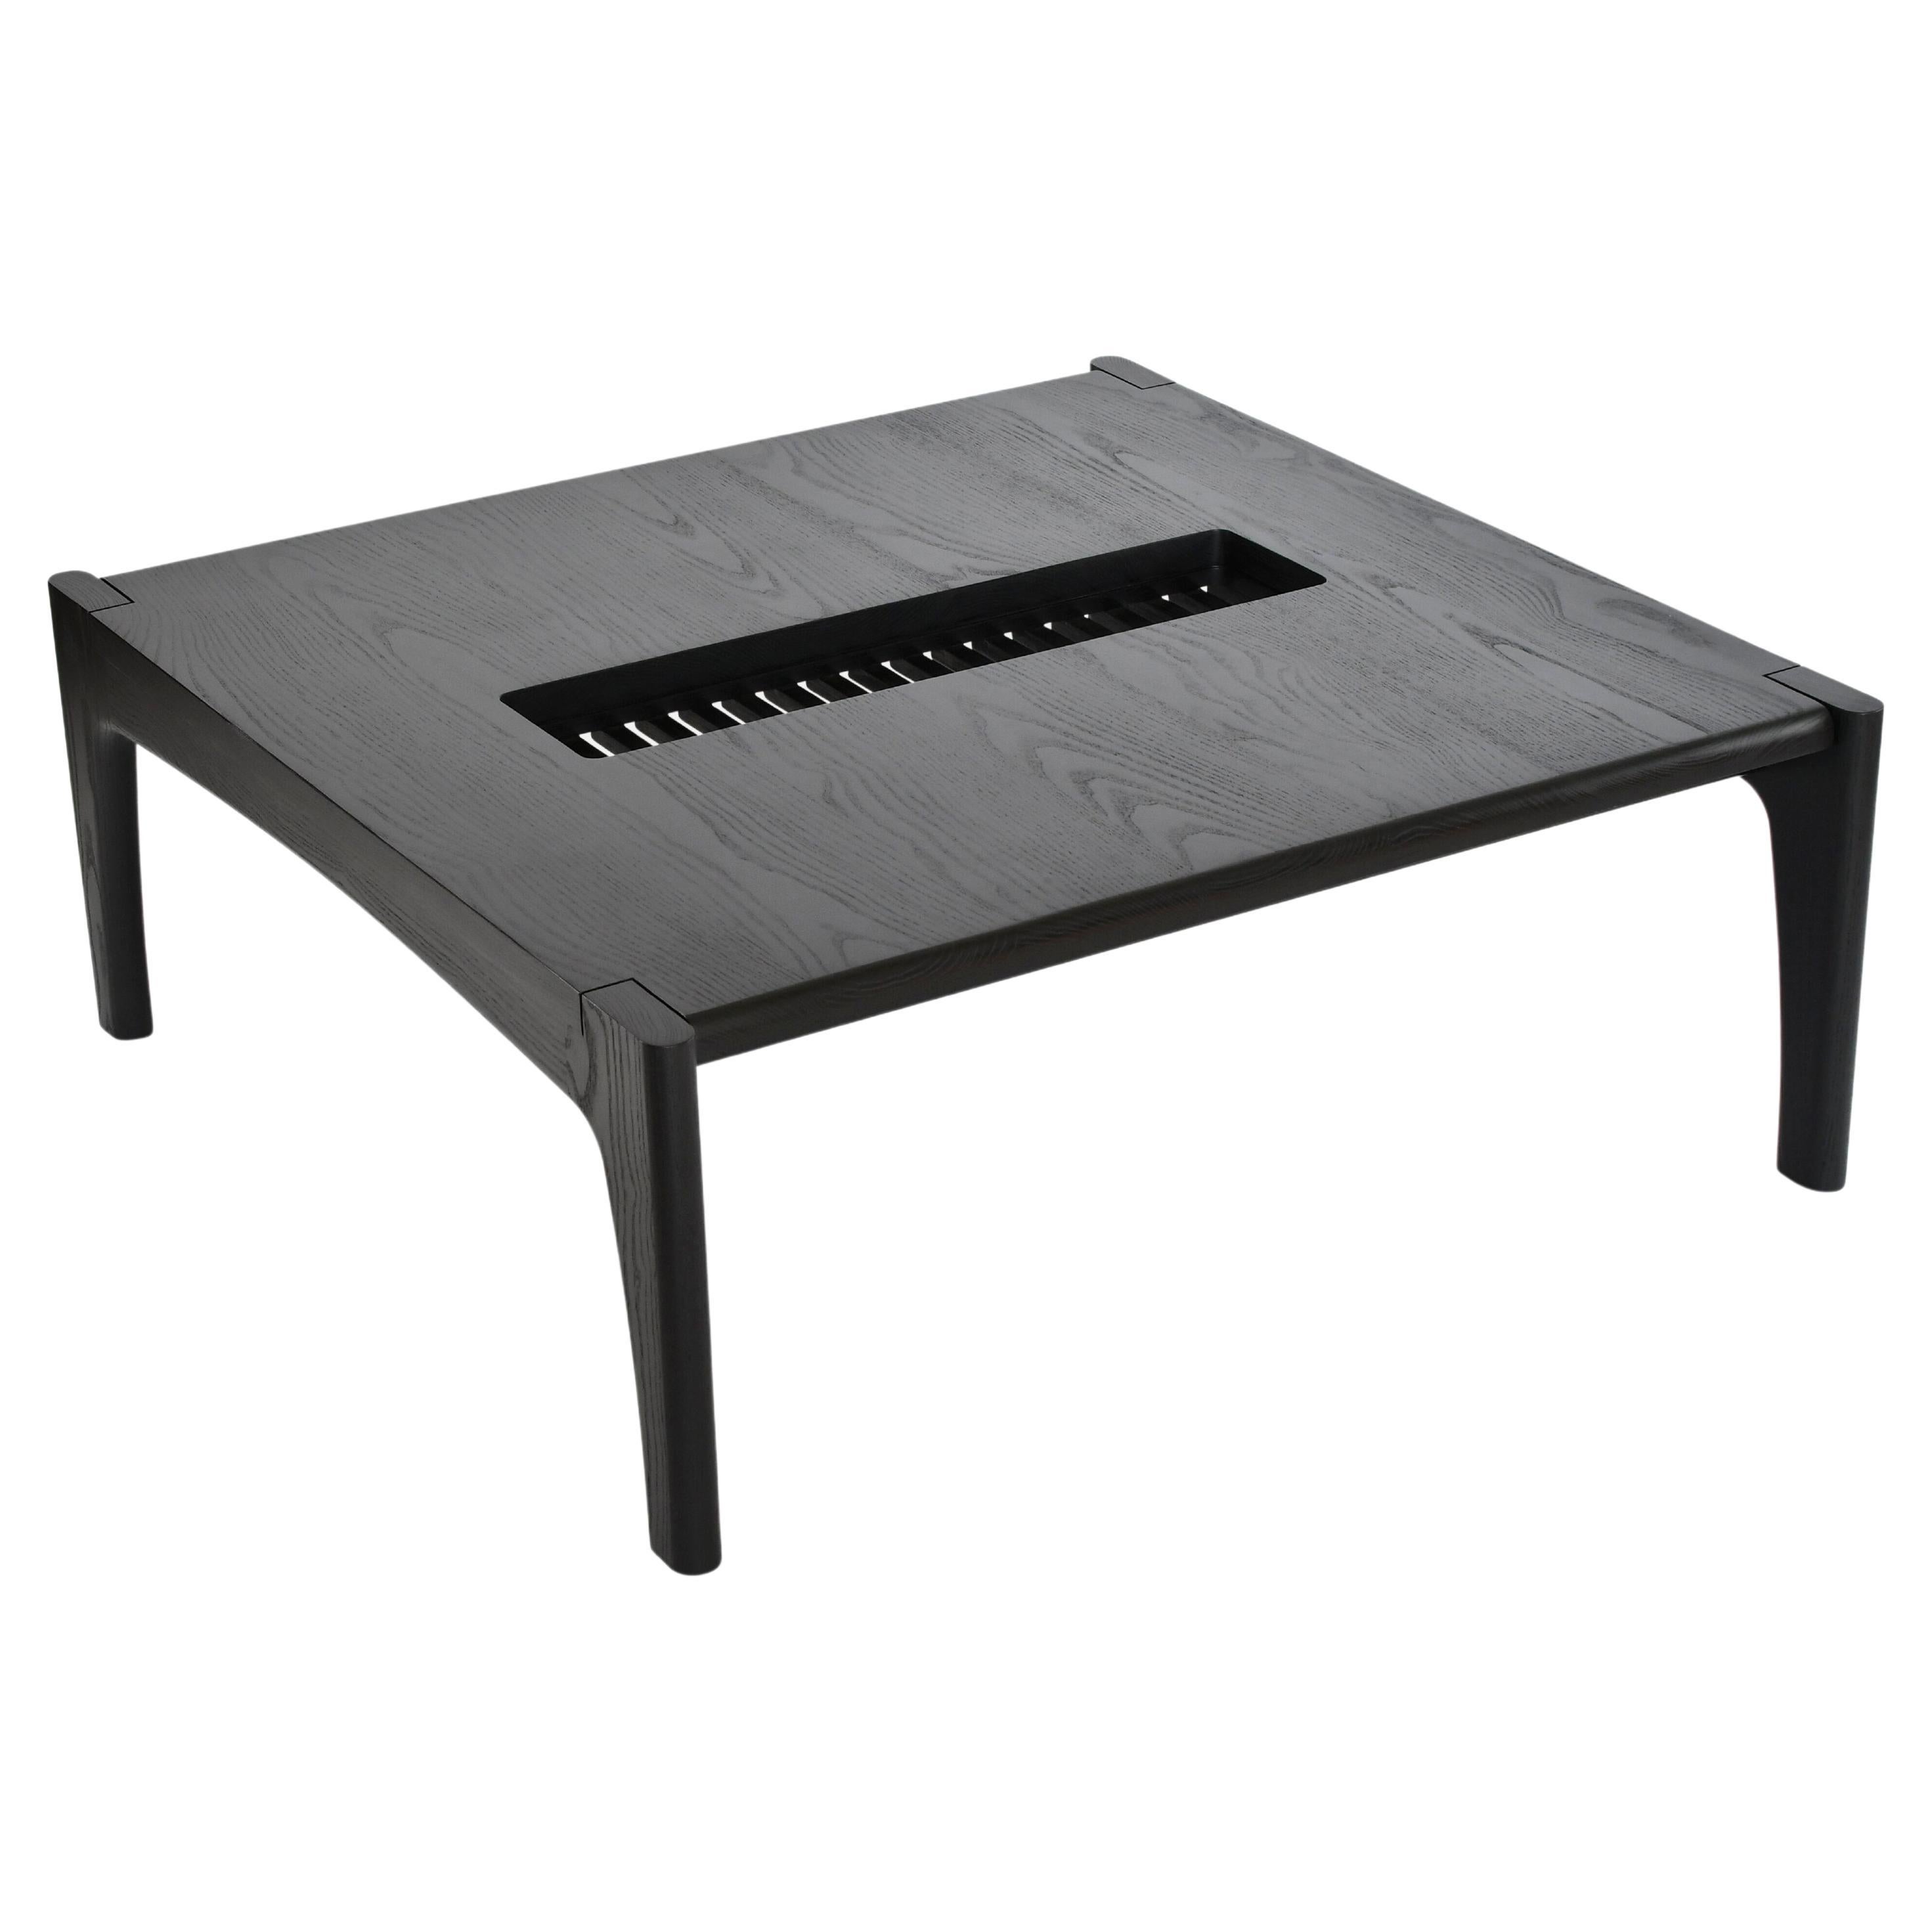 Tayo Coffee Table For Sale